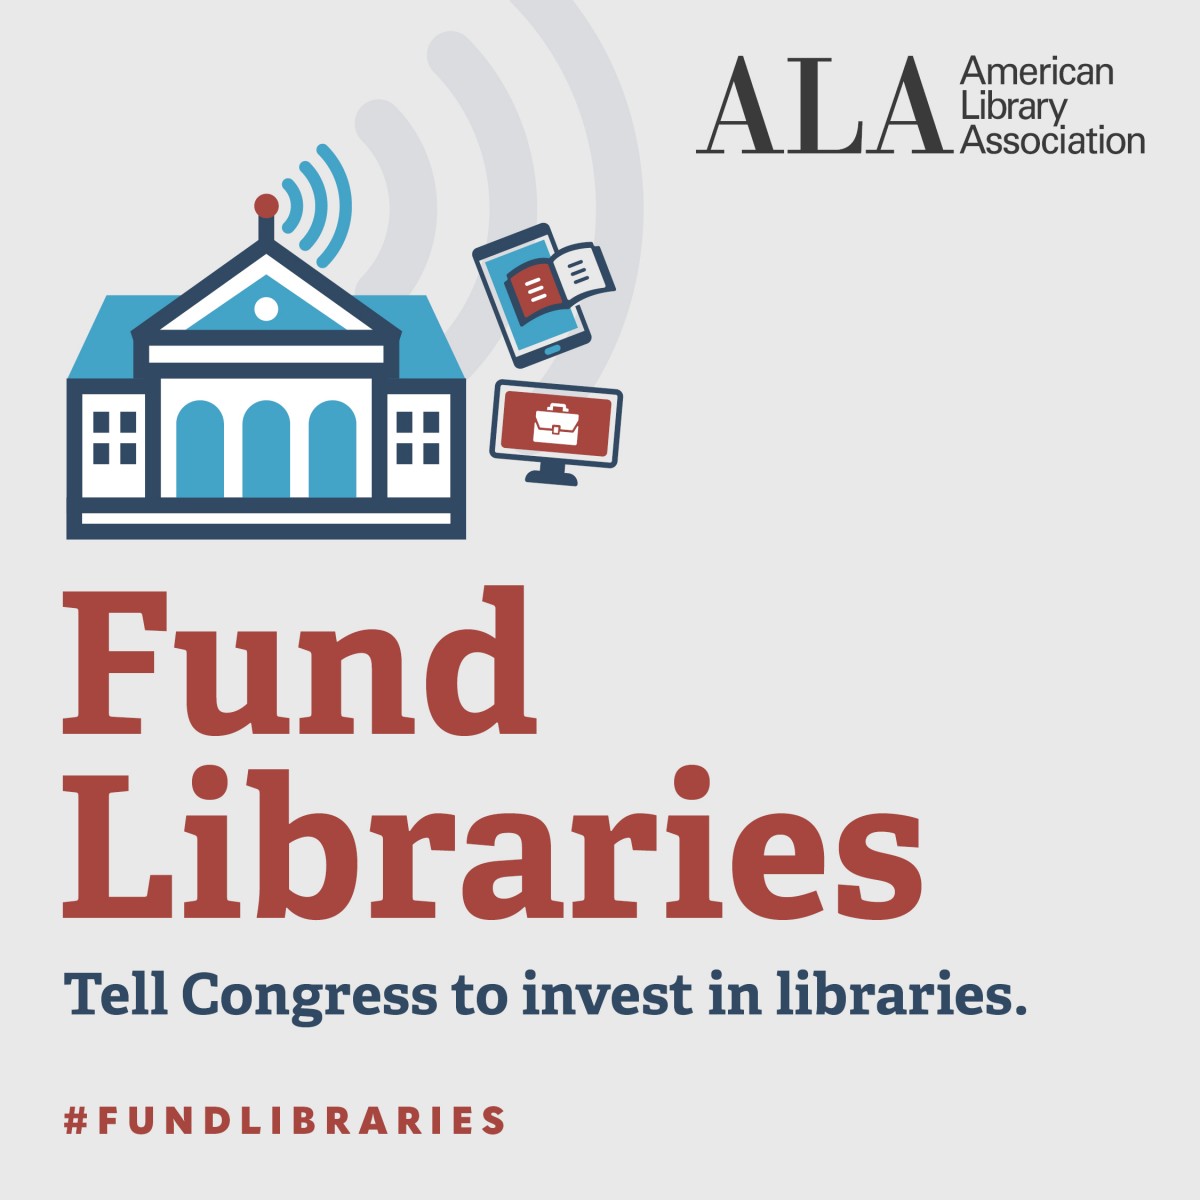 It's #TakeActionForLibrariesDay Library advocates nationwide stand together on Take Action for Libraries Day & call on our elected officials to keep #LibrariesStrong with sustainable federal funding, because we all know that strong libraries make strong communities #FundLibraries